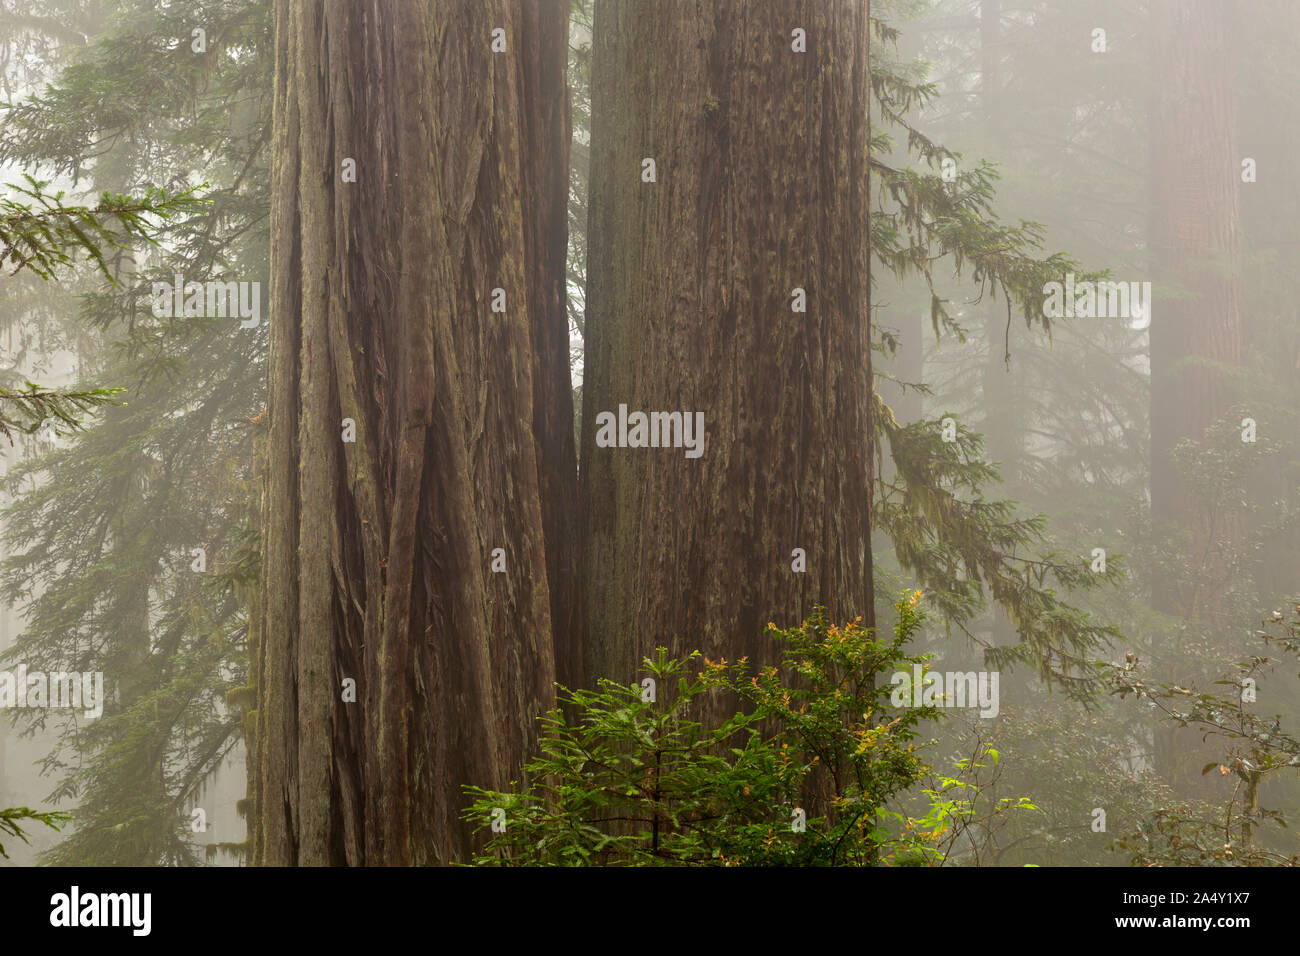 CA03686-00...CALIFORNIA - Large redwood trees and a foggy day at Lady Bird Johnson Grove in Redwoods National Park. Stock Photo